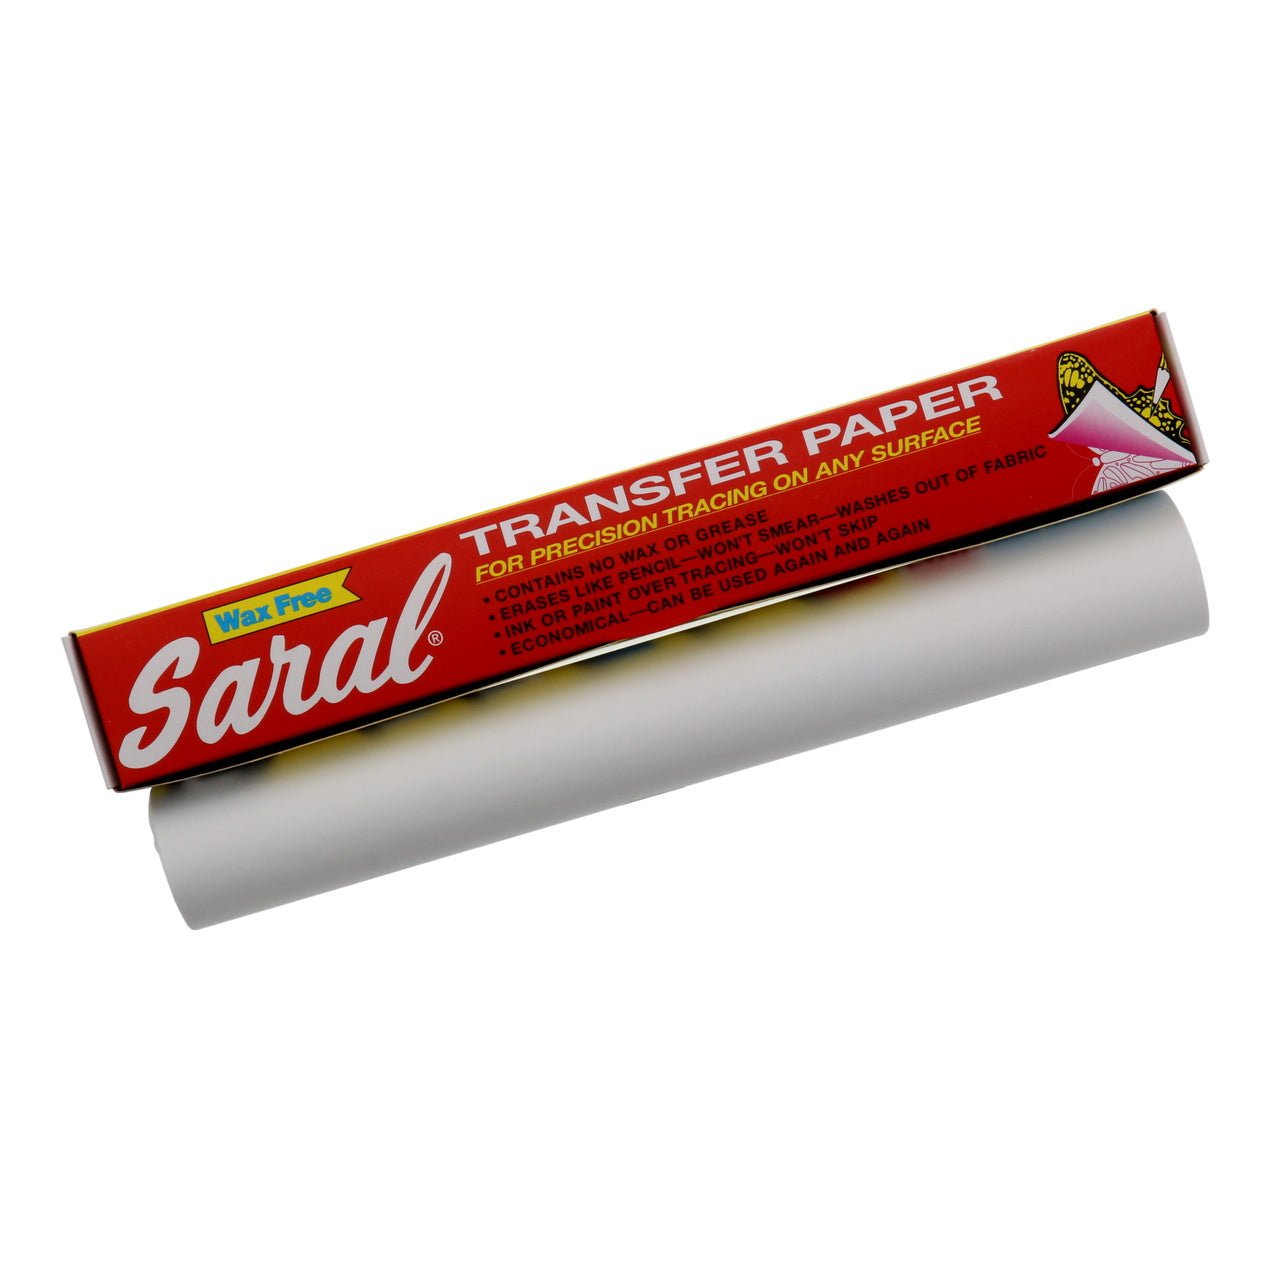 Saral Transfer Paper - 12 inch by 12 ft roll - White - merriartist.com